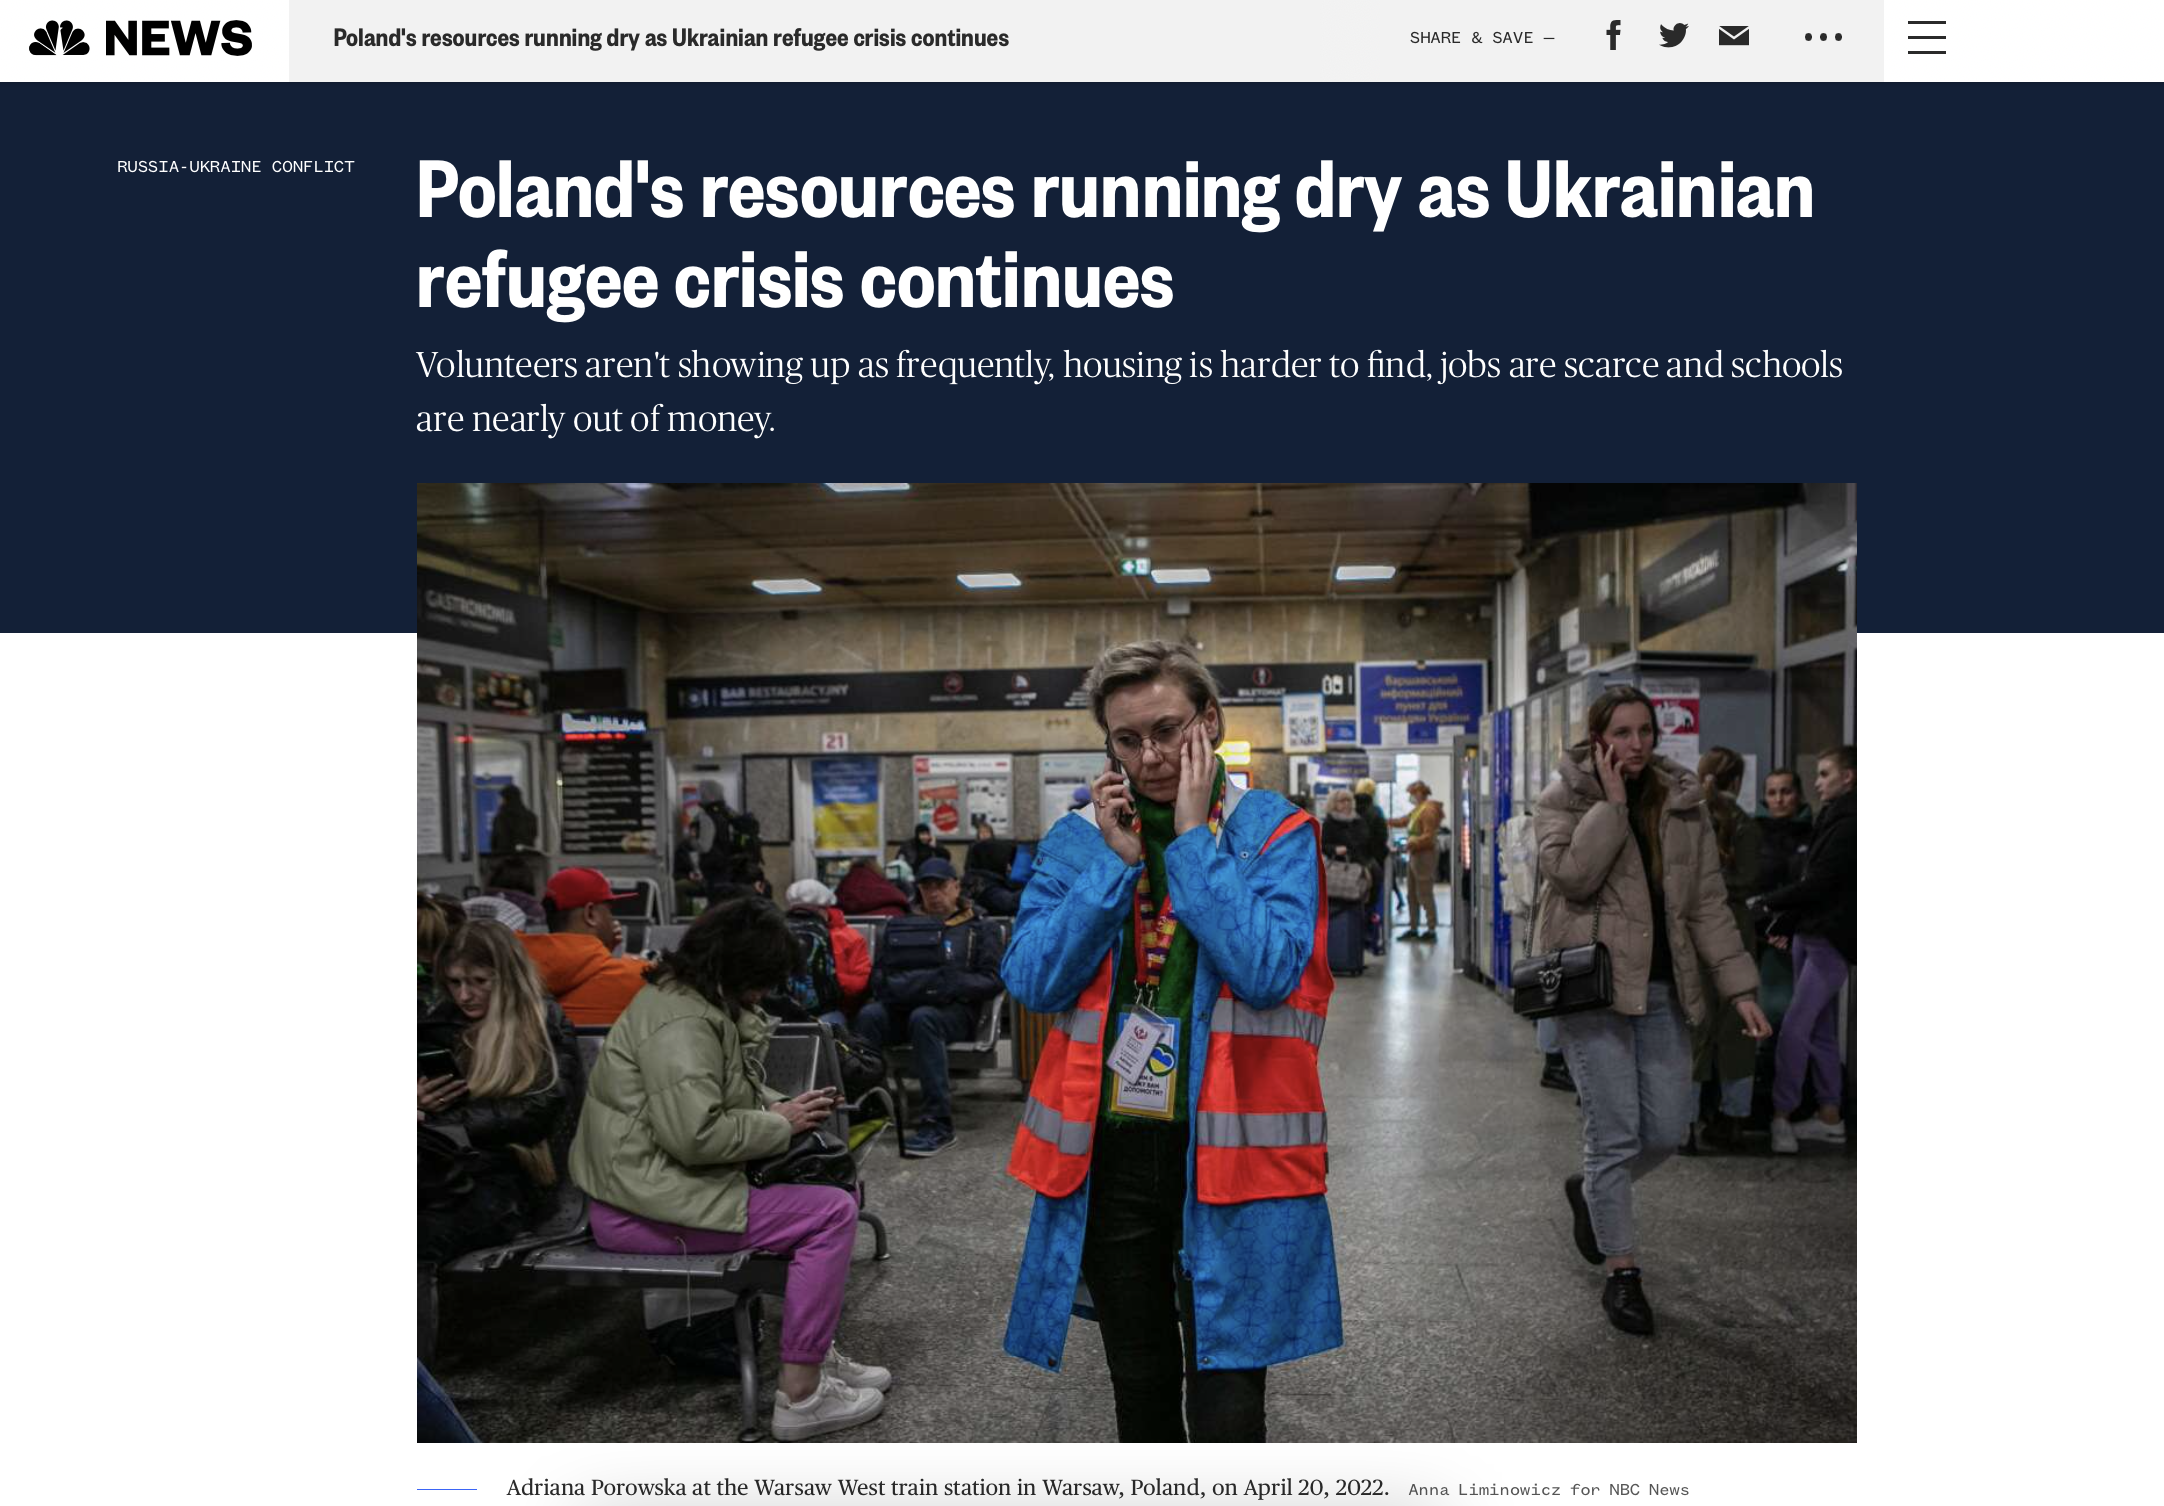 Poland's resources running dry as Ukrainian refugee crisis continues